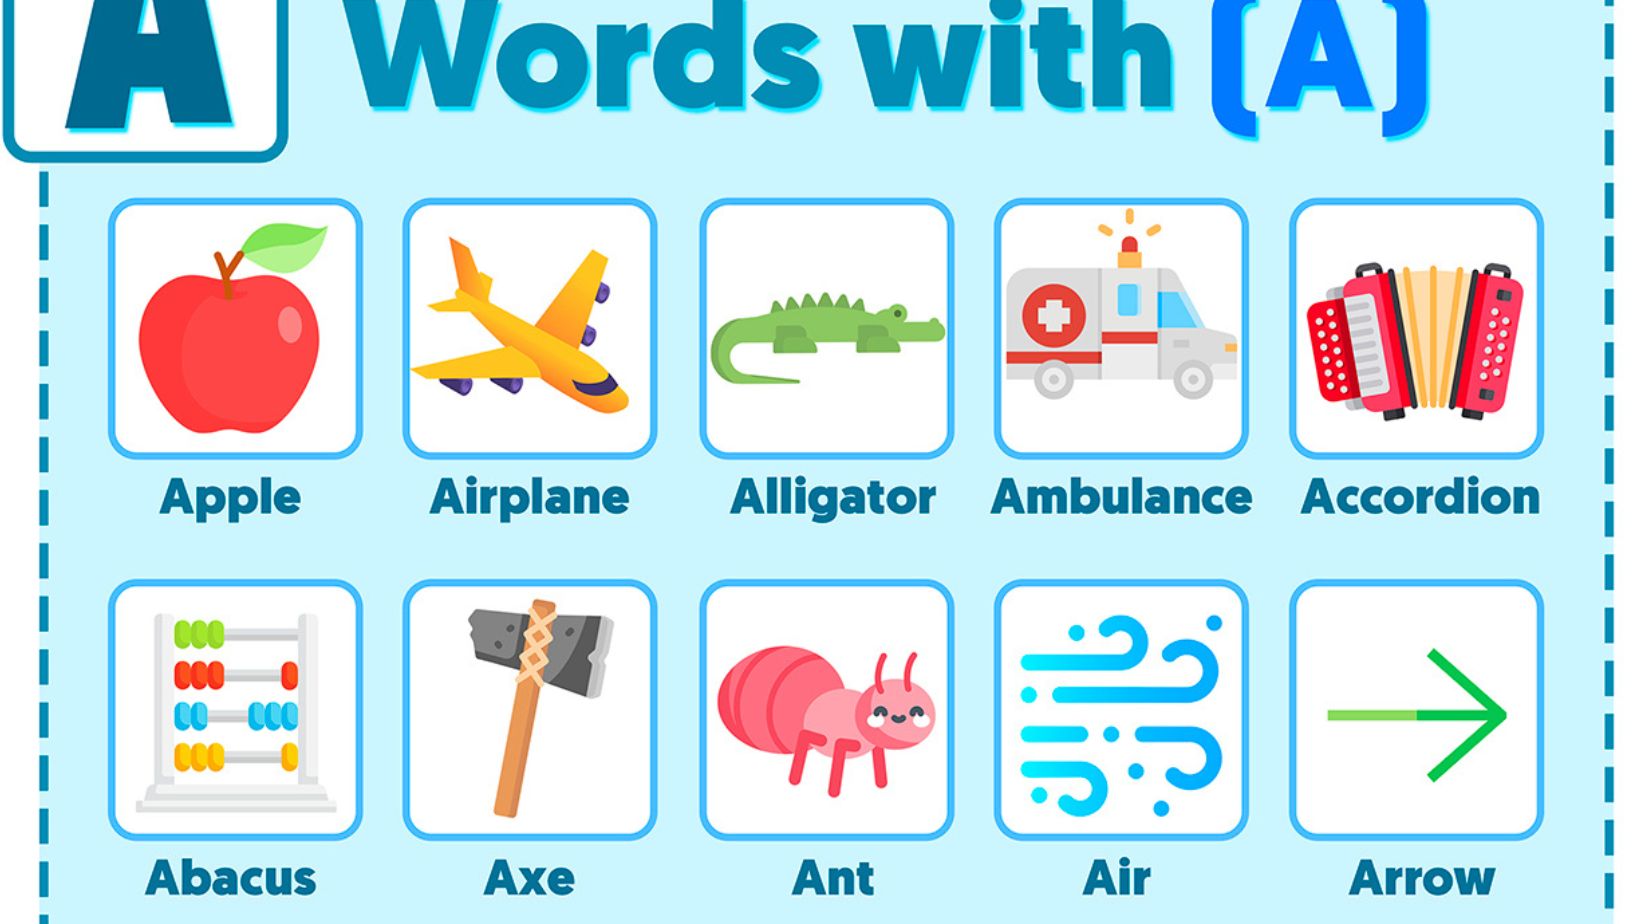 6 Letter Words with These Letters wordswithletters org